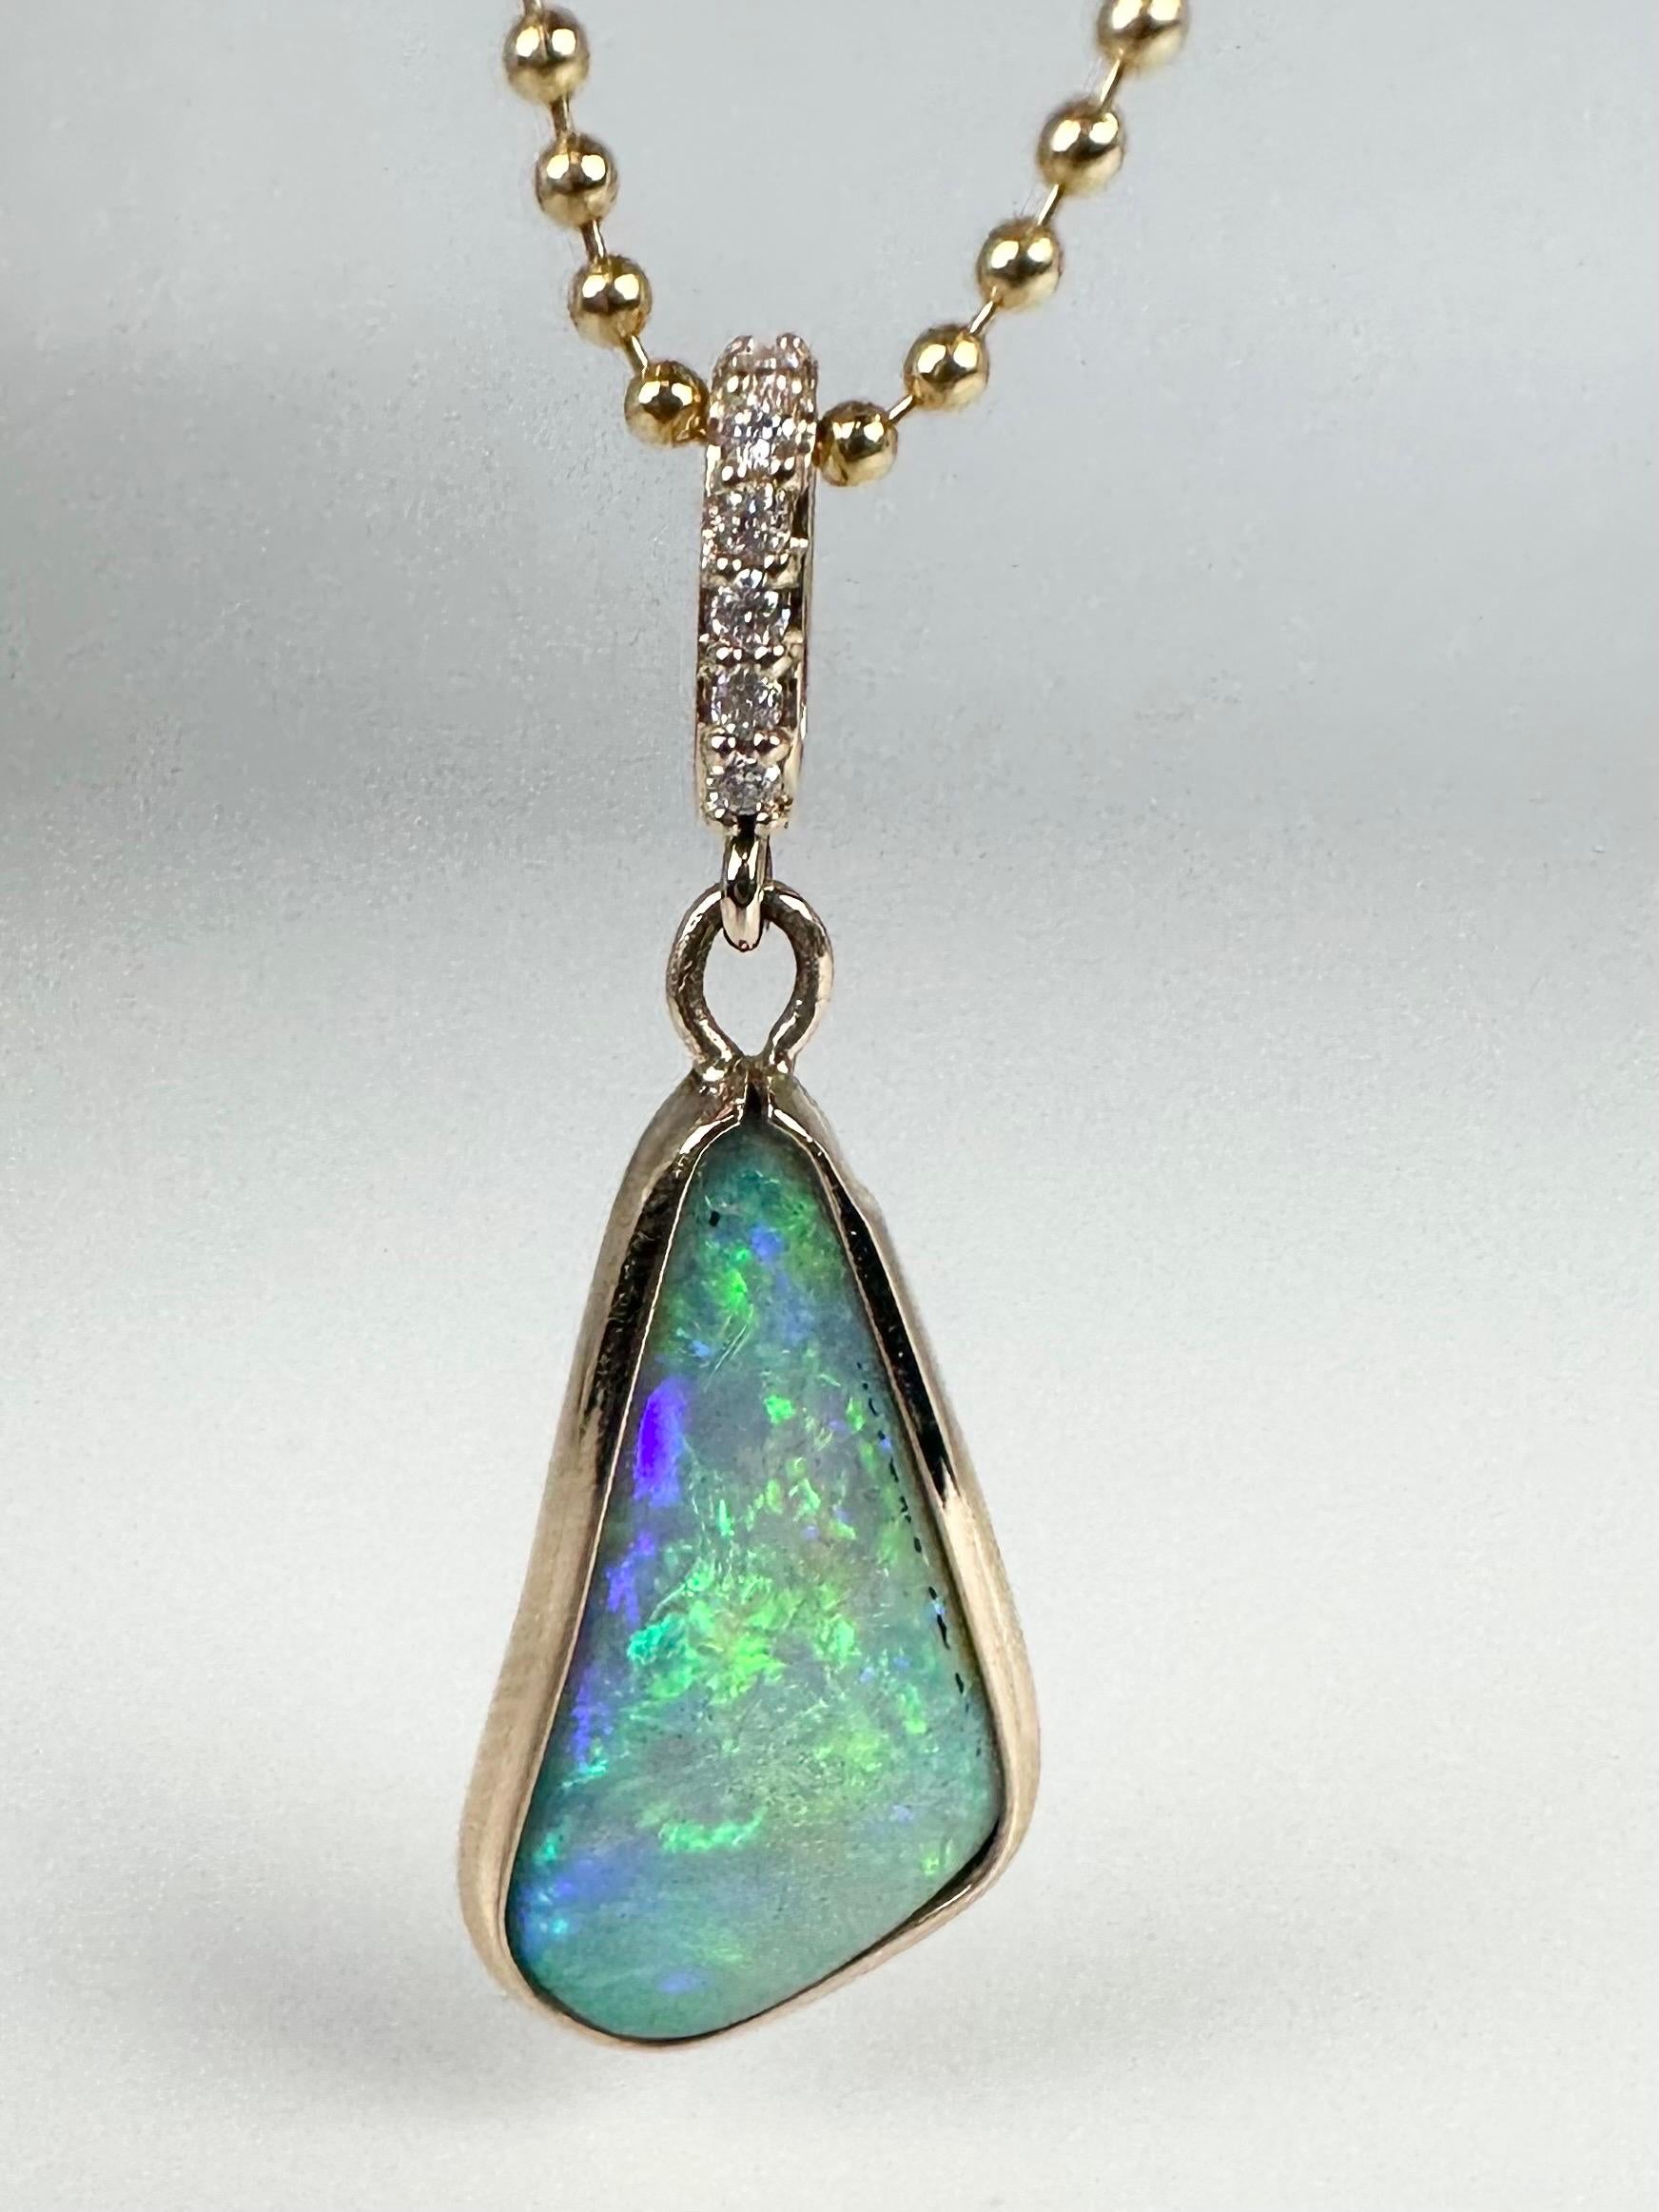 Unique Modern Australian opal pendant with diamonds on the top in 14KT yellow gold. Comes with a fancy chain!

GOLD: 14KT gold
NATURAL DIAMOND(S)
Clarity/Color: VS/F-G
Carat:0.06ct
Cut:Round Brilliant
NATURAL OPAL(S)
Color: Rainbow
Grams:3.60
Item#: